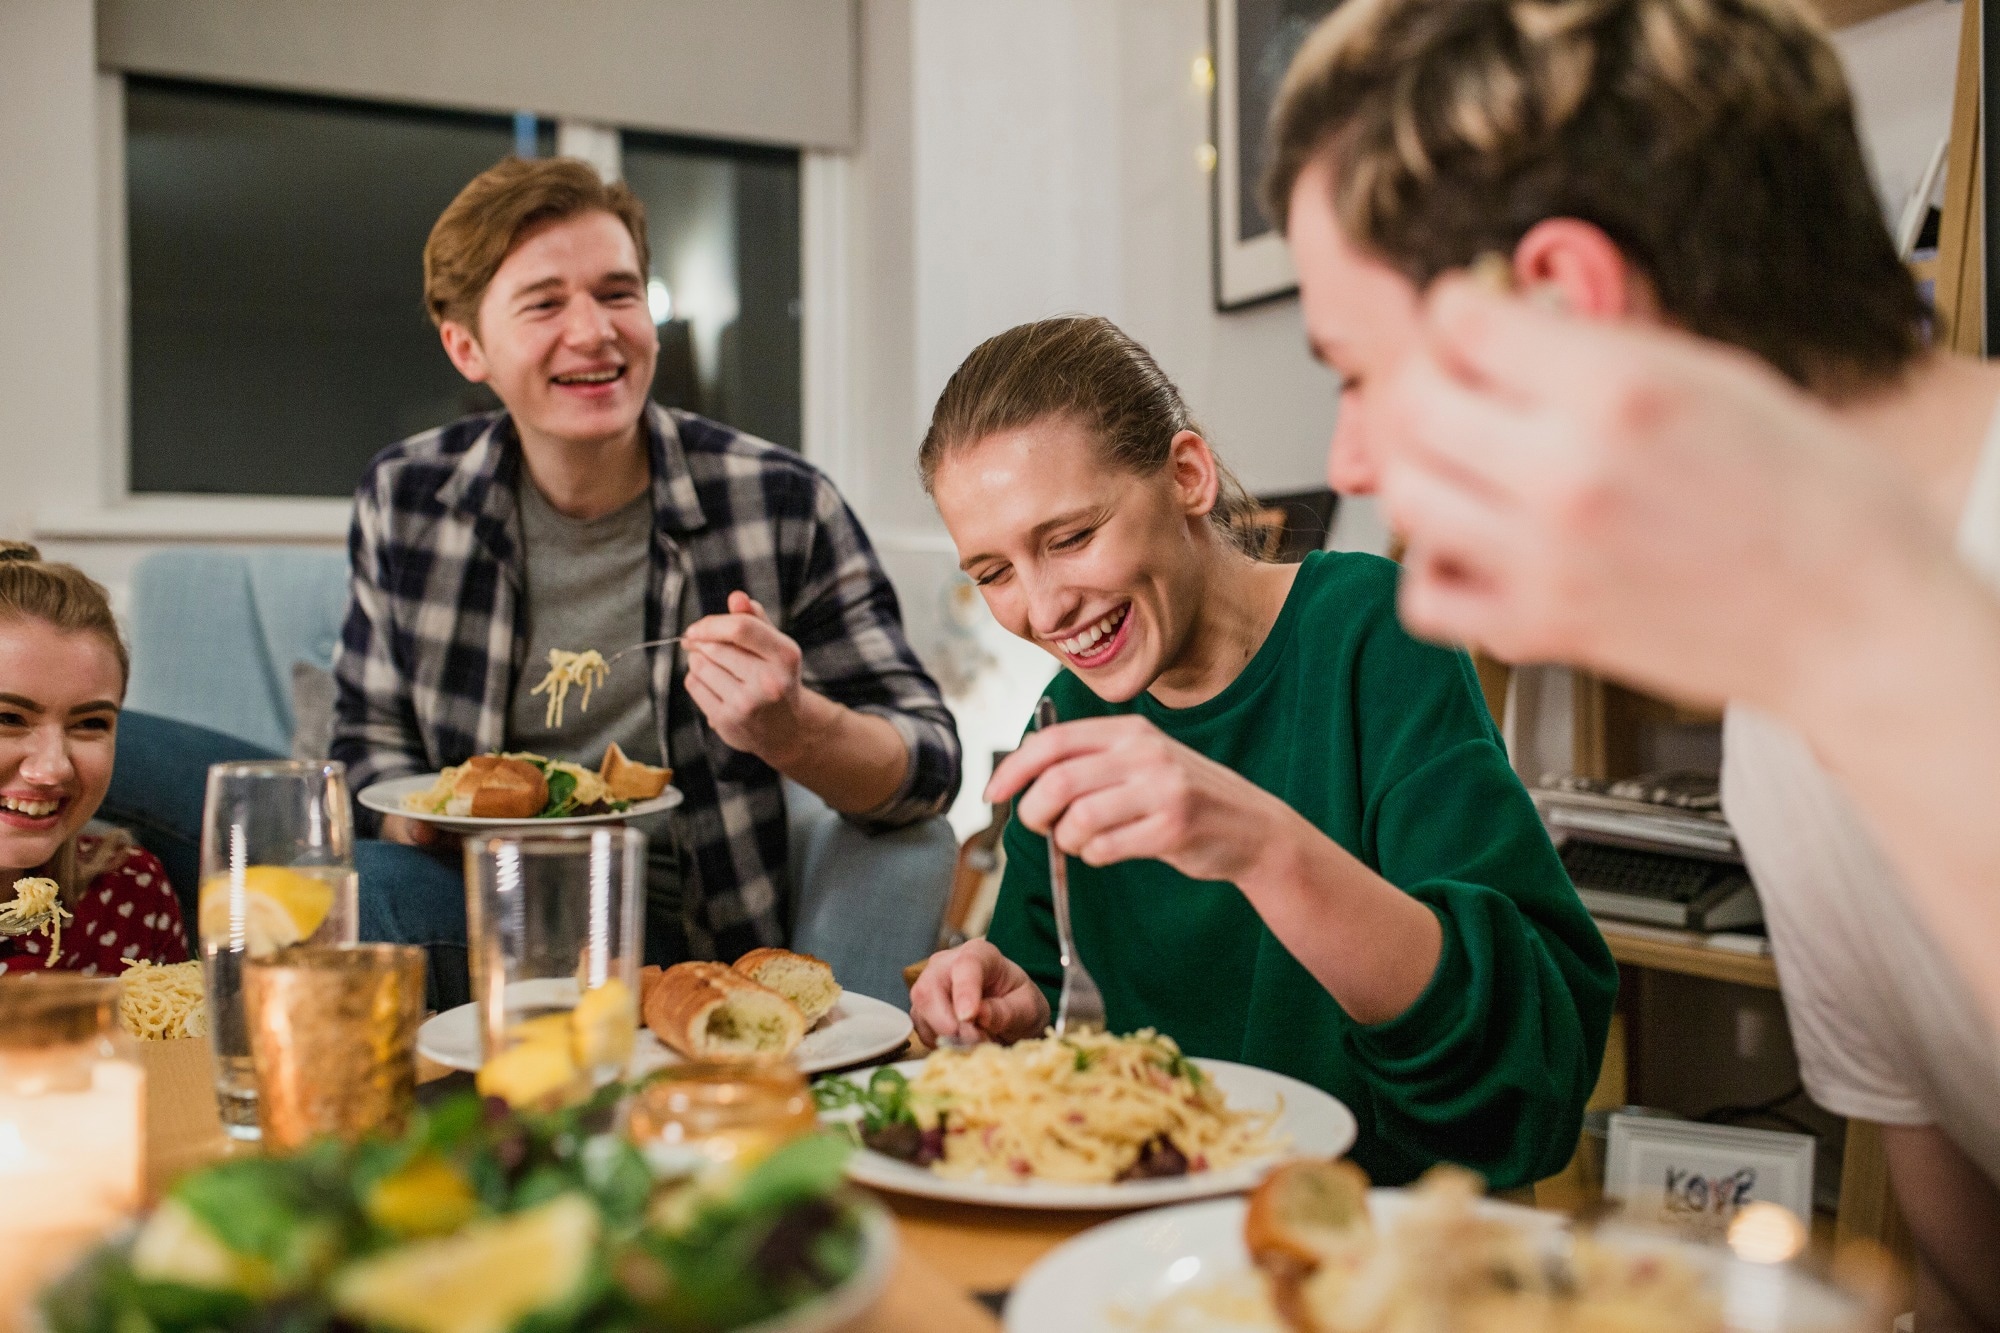 Study: Low Cooking Skills Are Associated with Overweight and Obesity in Undergraduates. Image Credit: DGLimages/Shutterstock.com